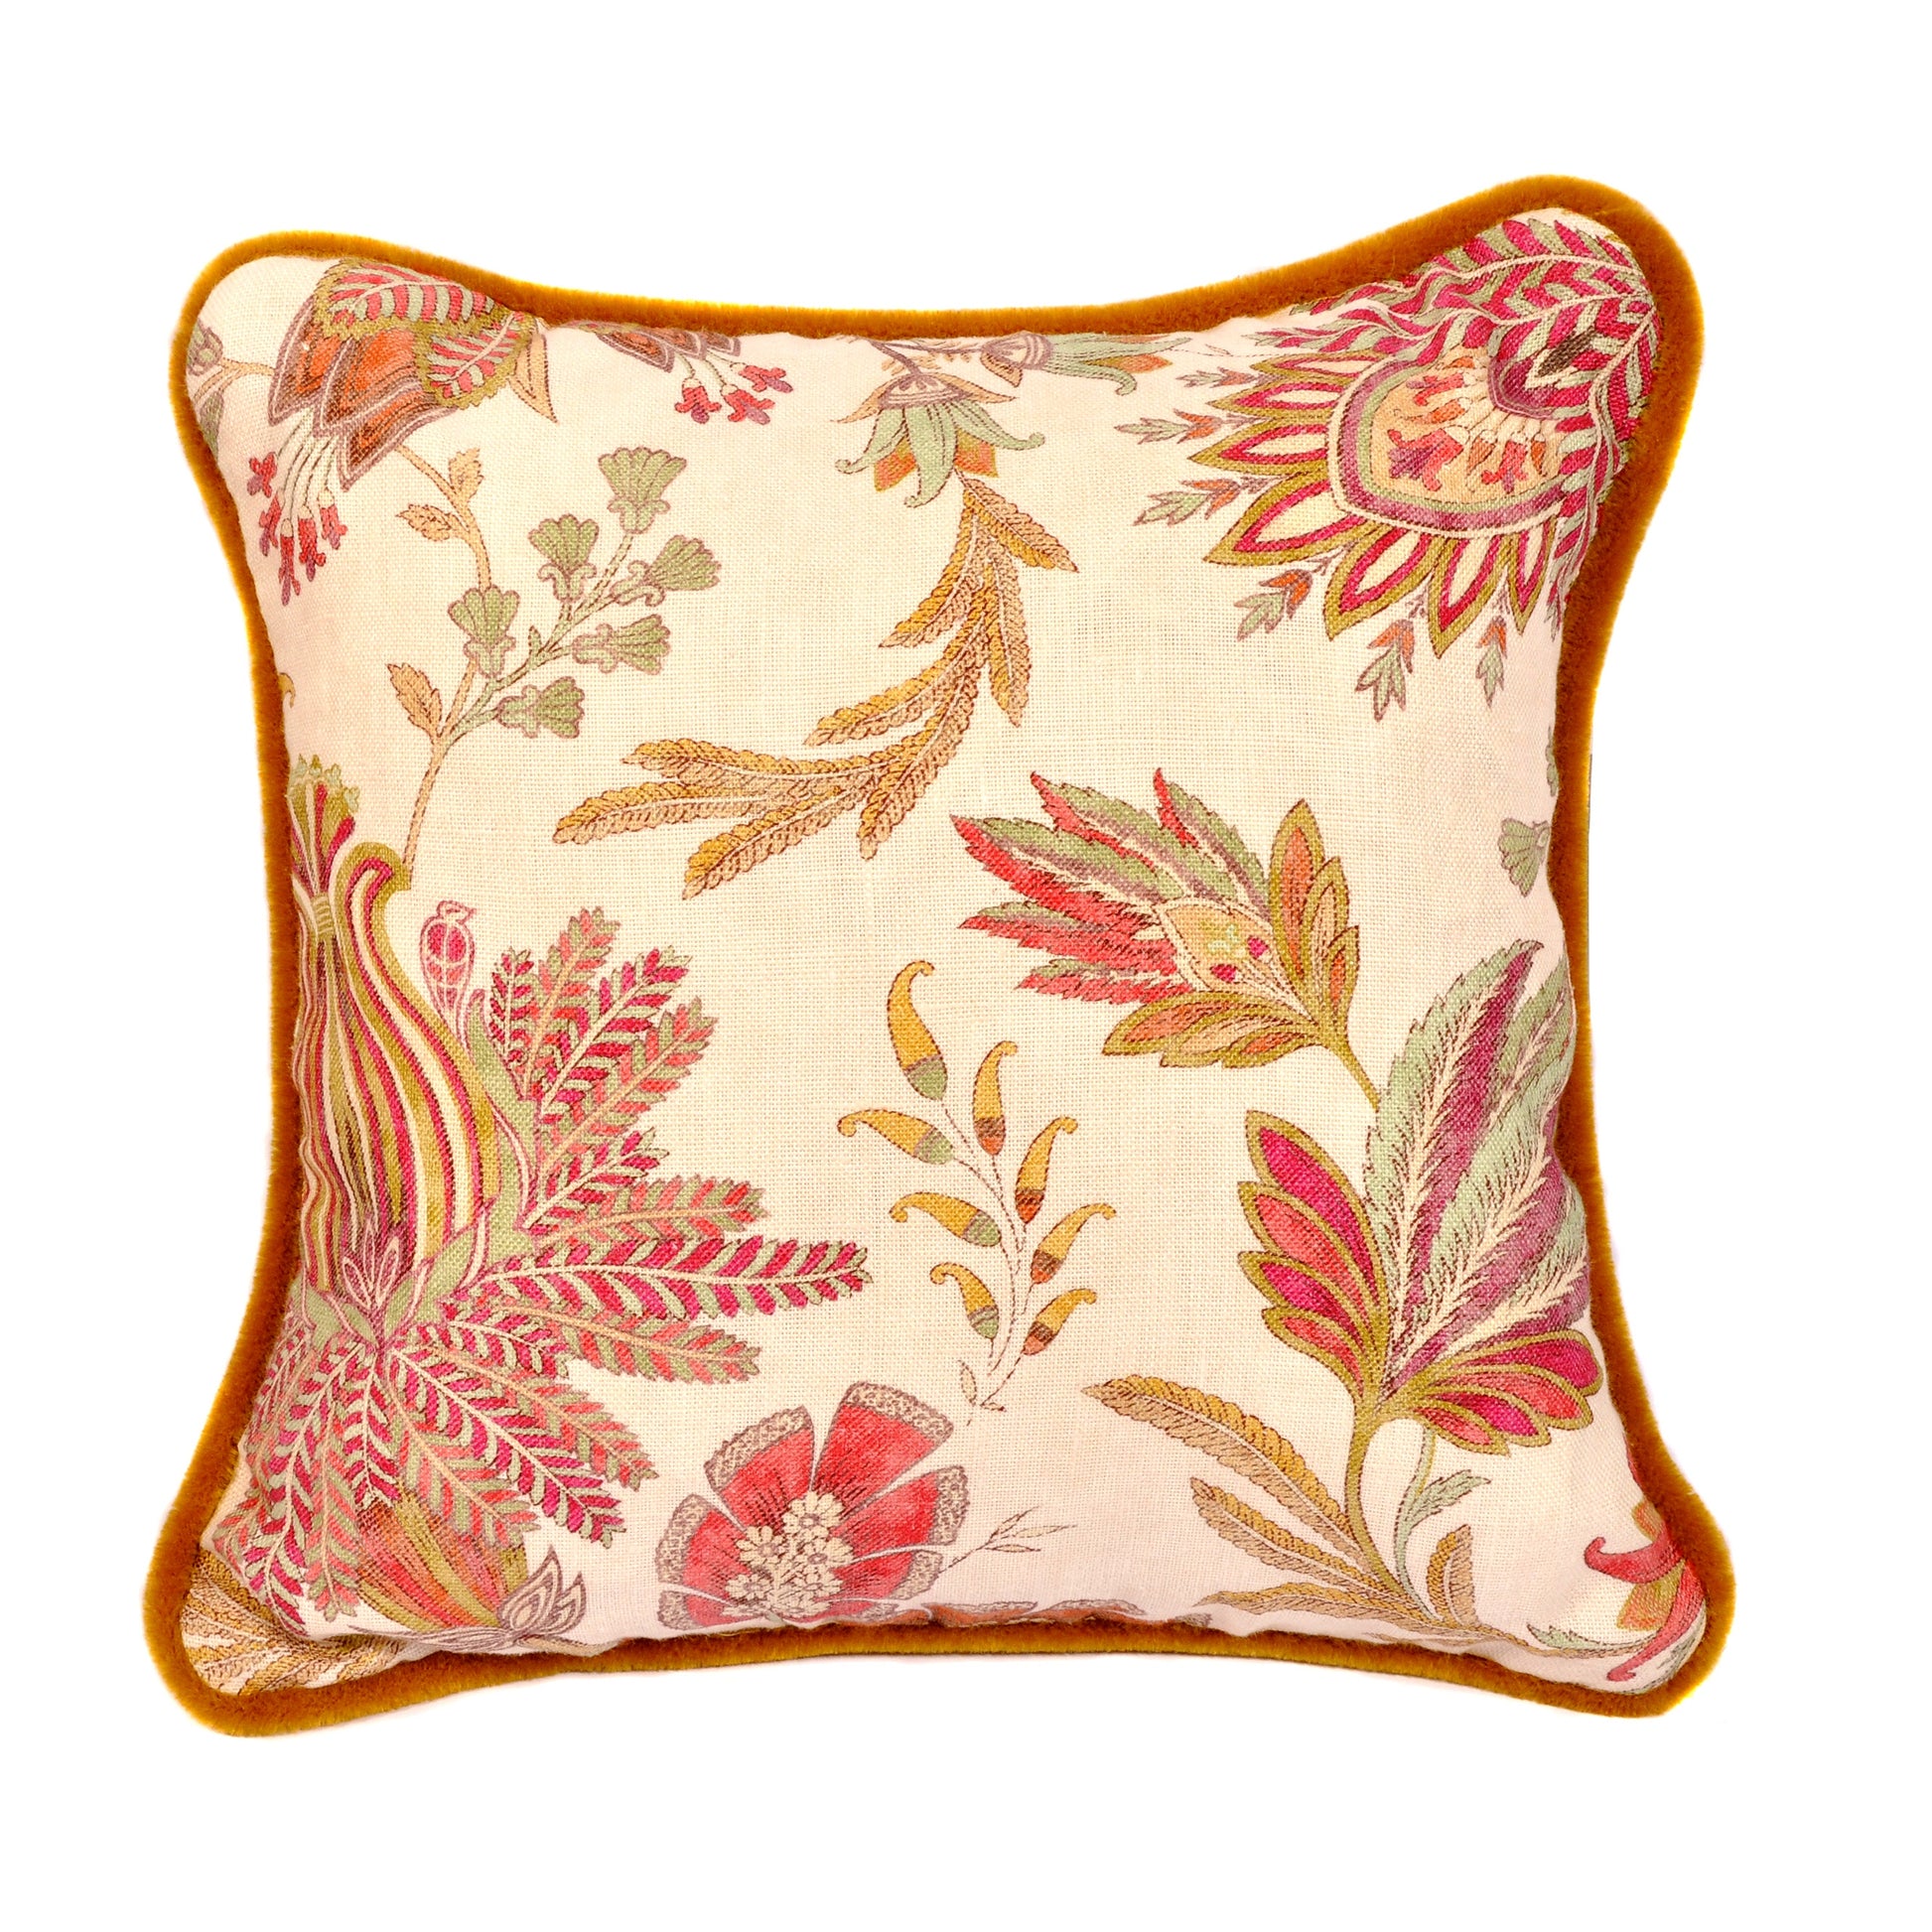 Pinks, Greens and Yellows Floral Cushion with Ochre Velvet Trim Not specified